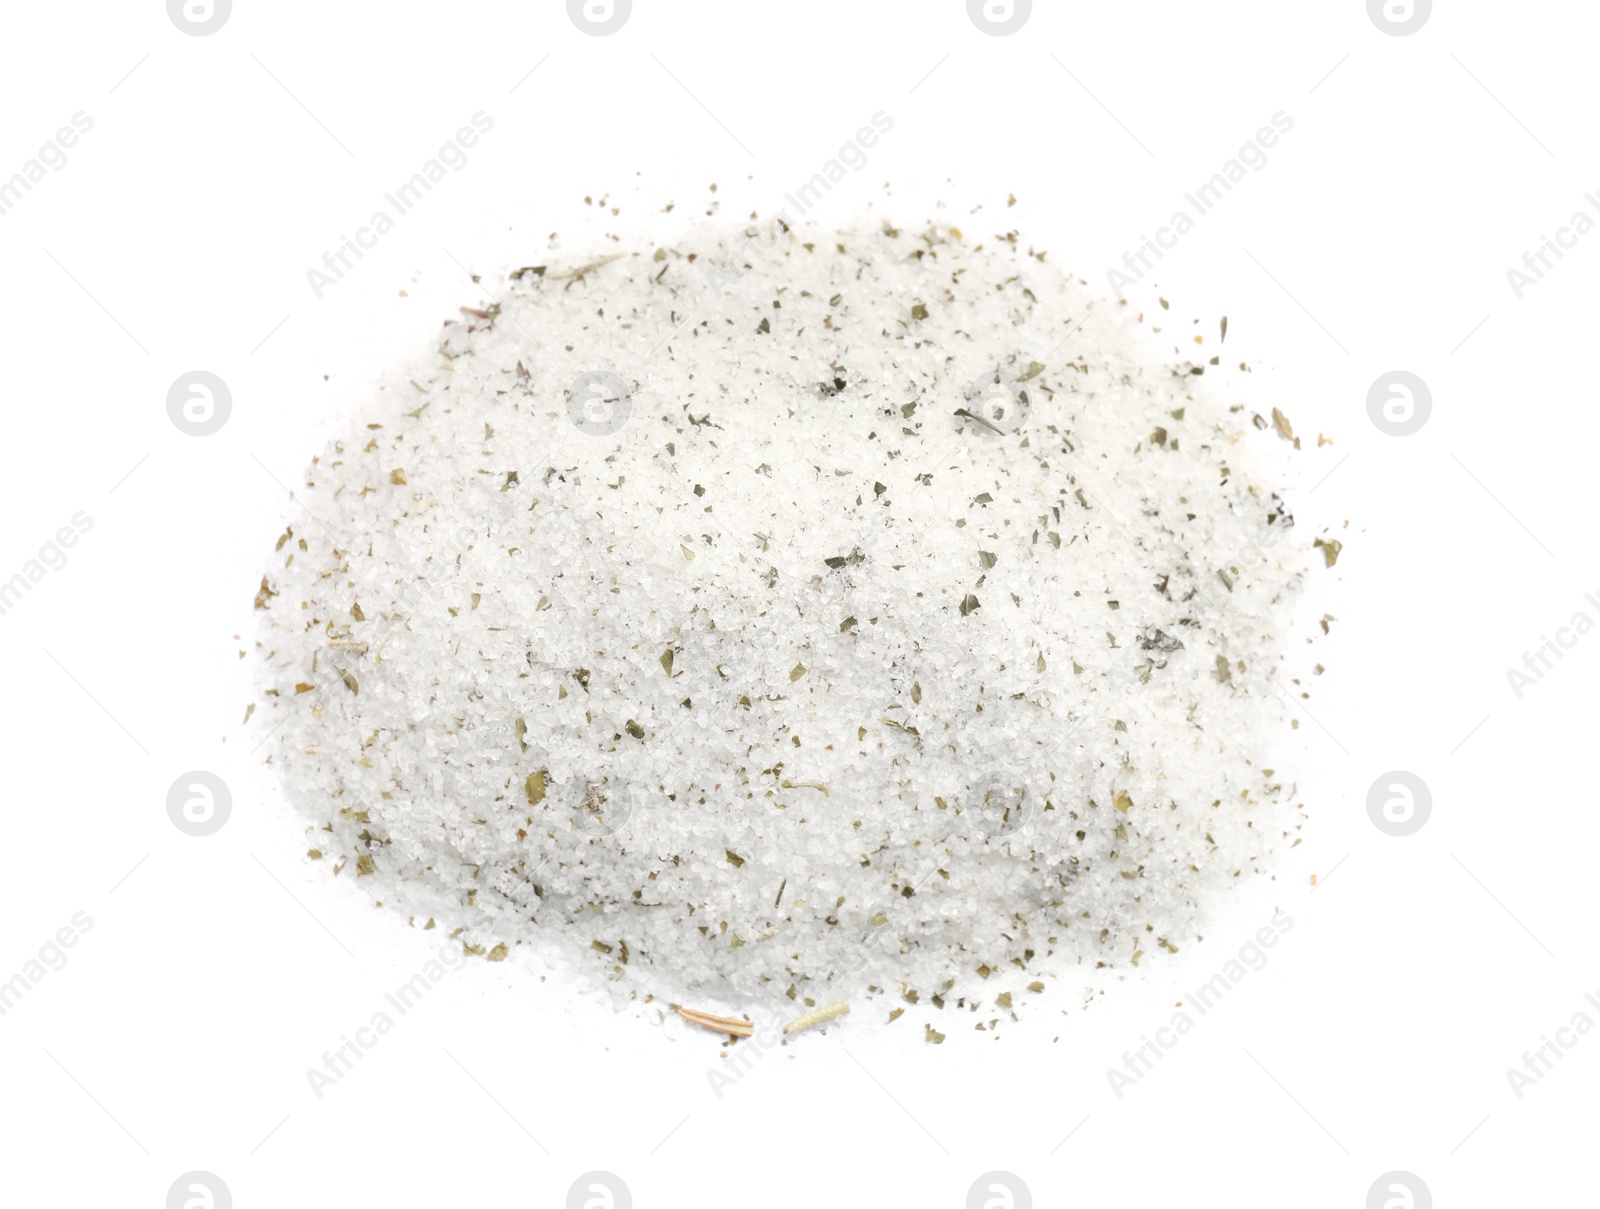 Photo of Heap of natural herb salt on white background, top view